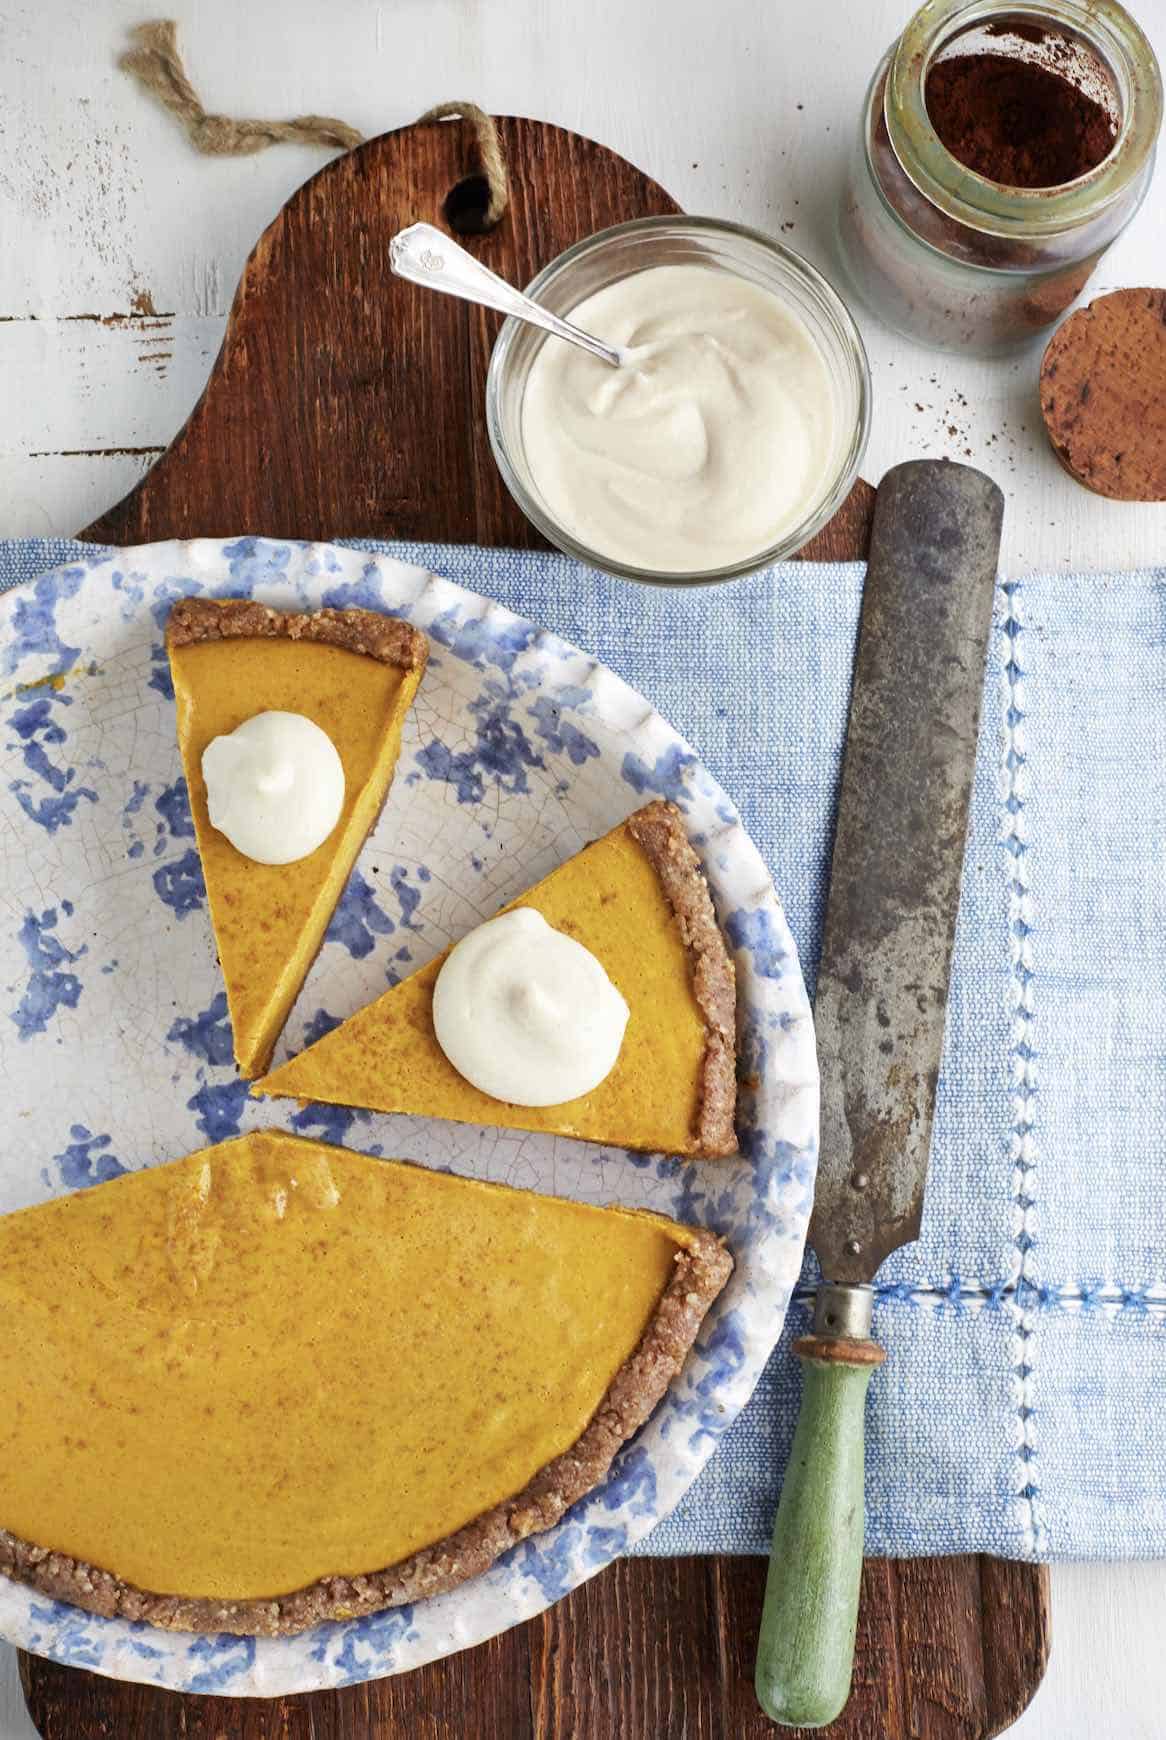 A pumpkin pie, with a slice missing, beautifully presented on a plate.